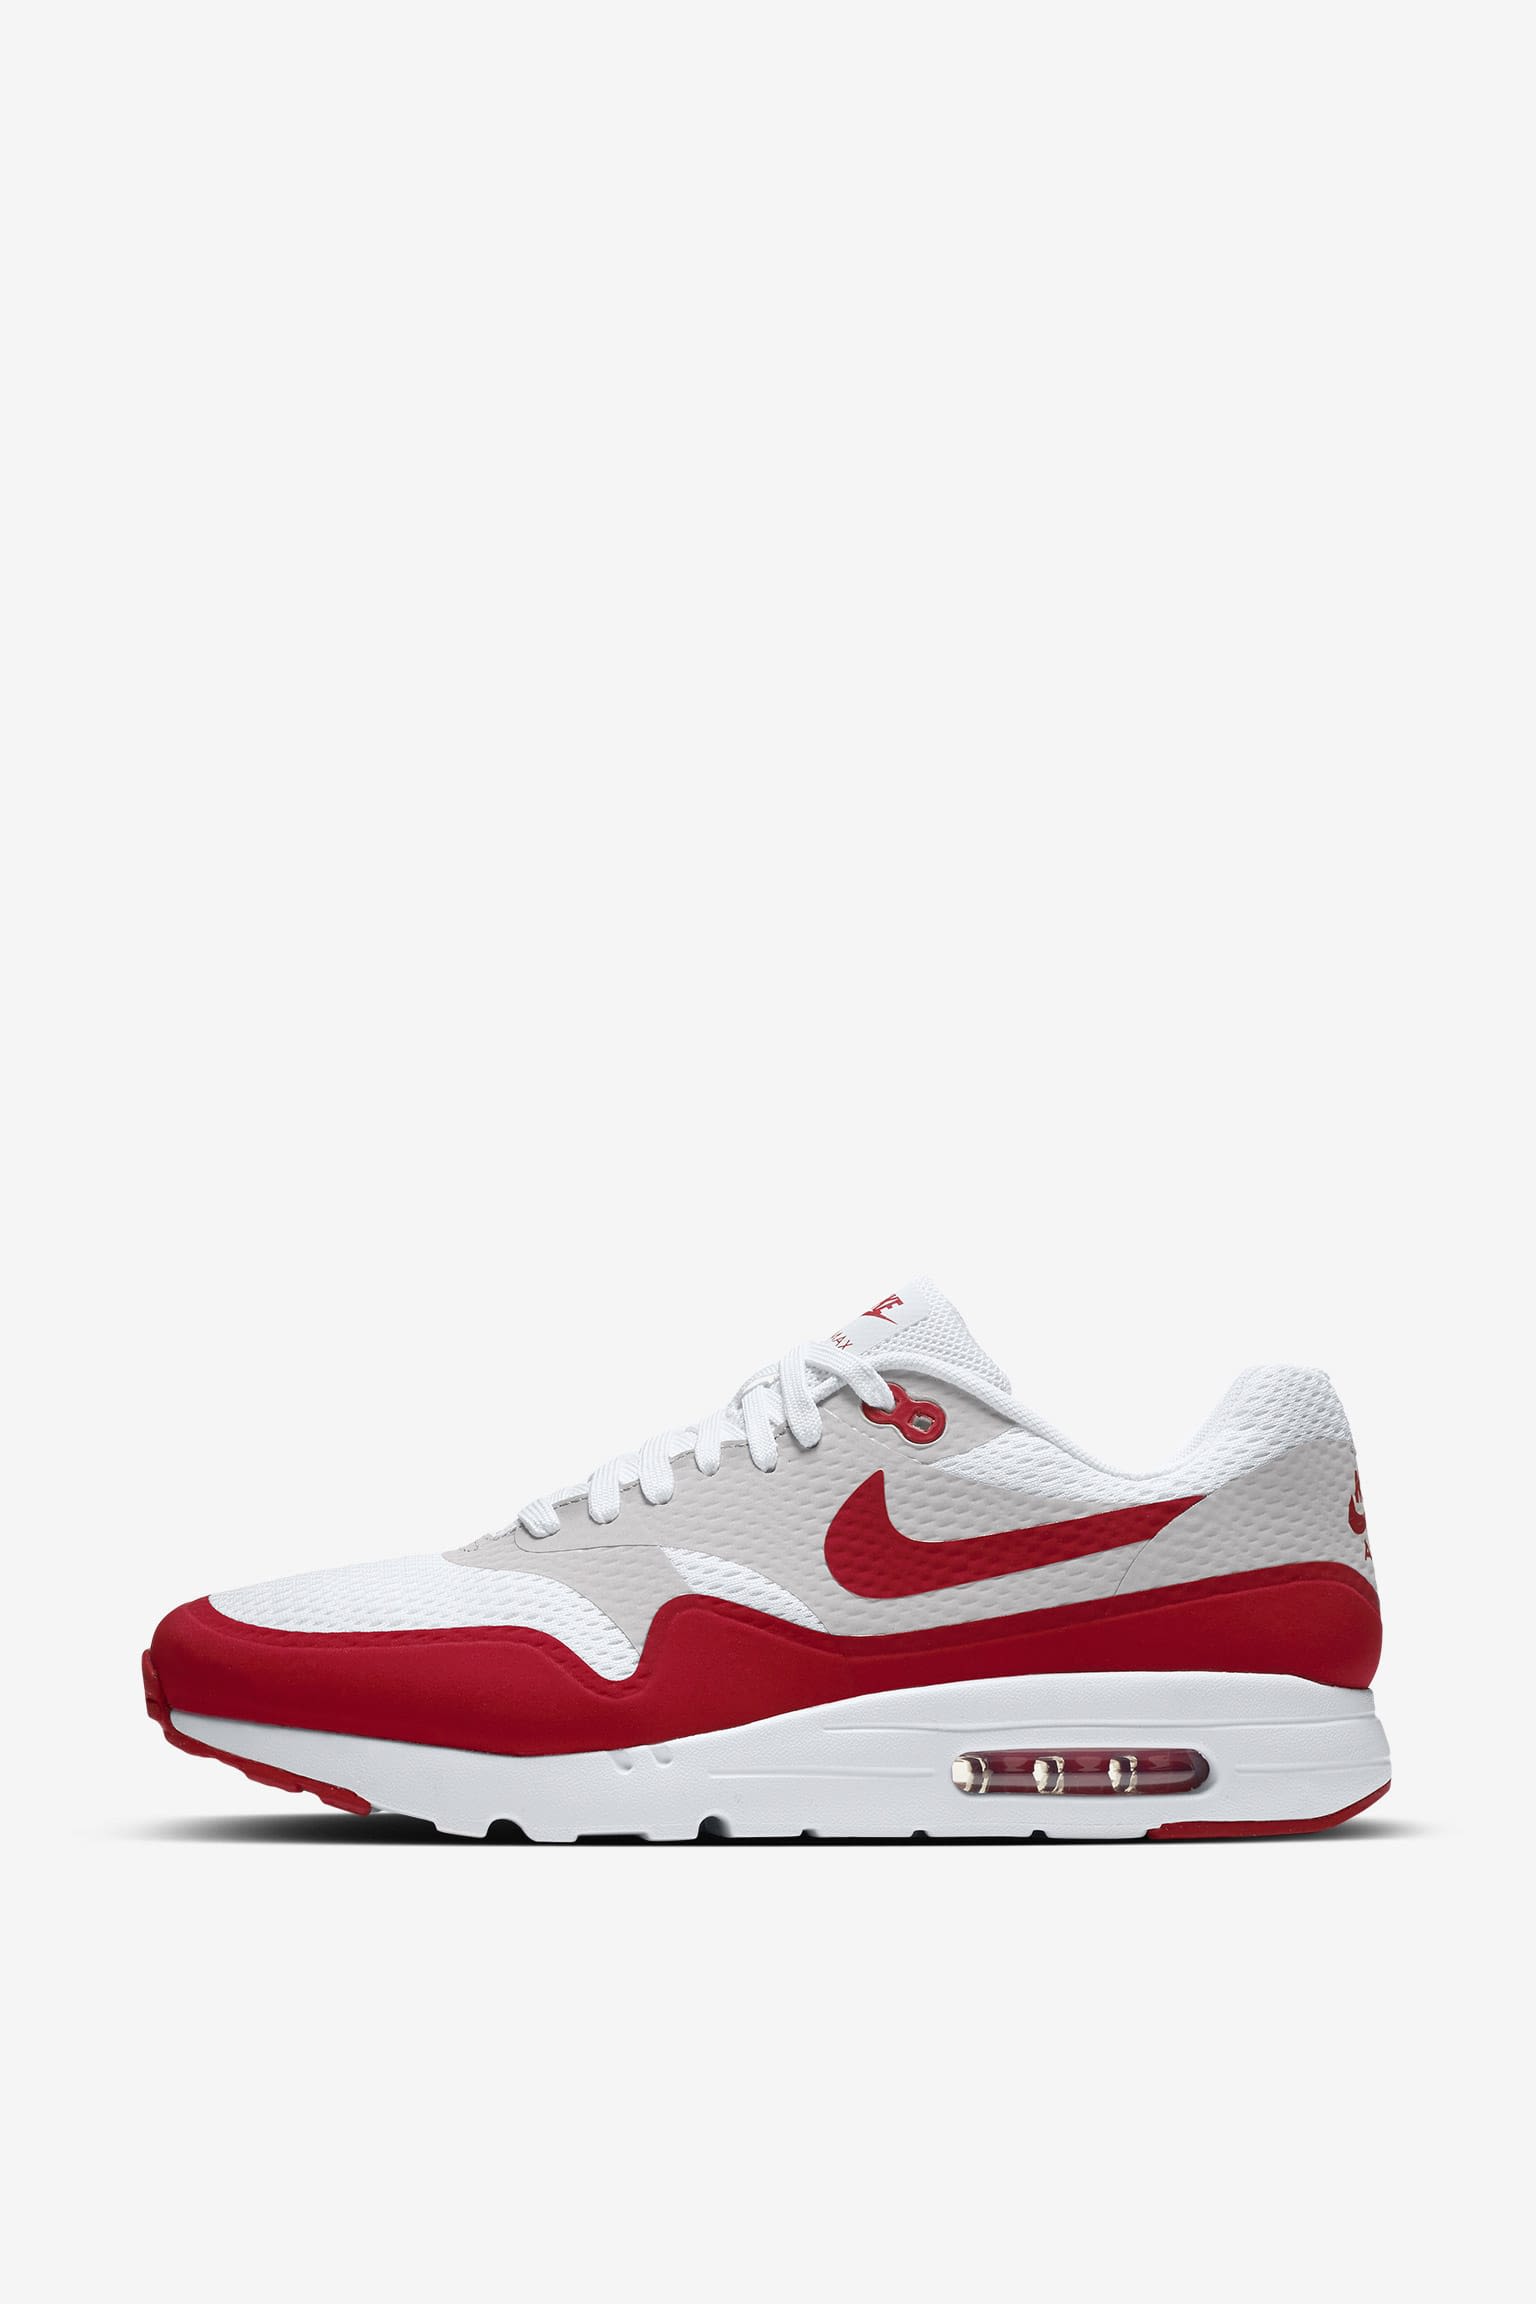 nike air max 1 limited edition 2015